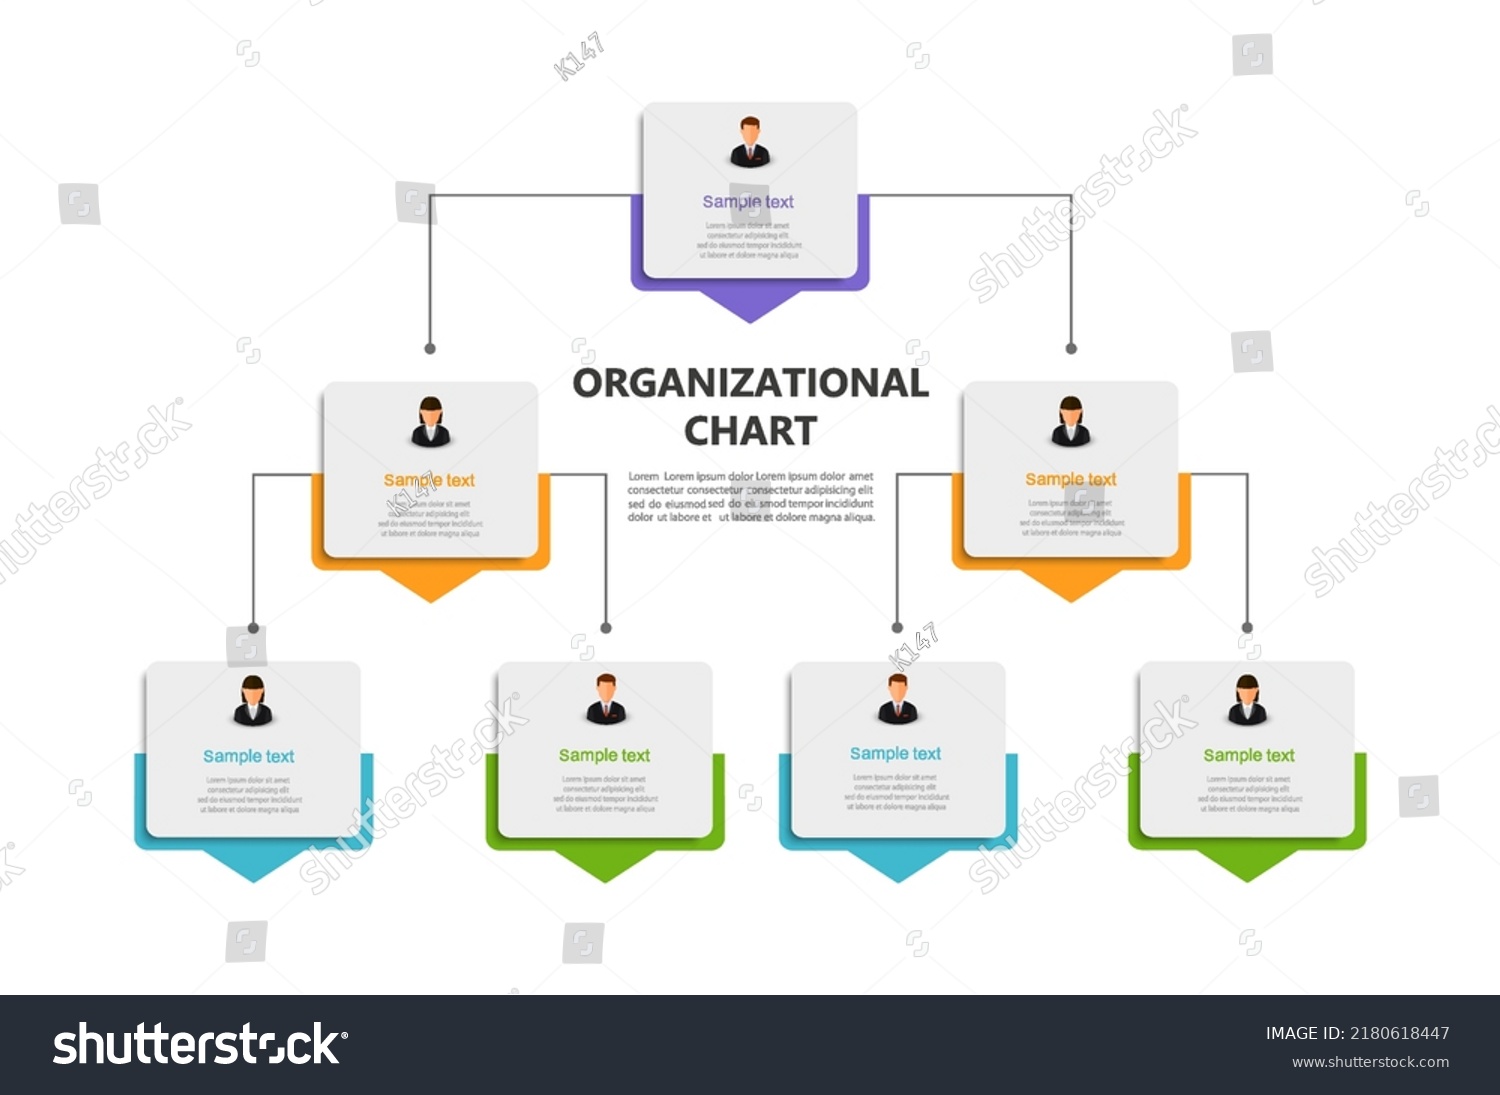 Corporate organizational chart with business avatar  icons. Business hierarchy infographic elements. Vector illustration #2180618447